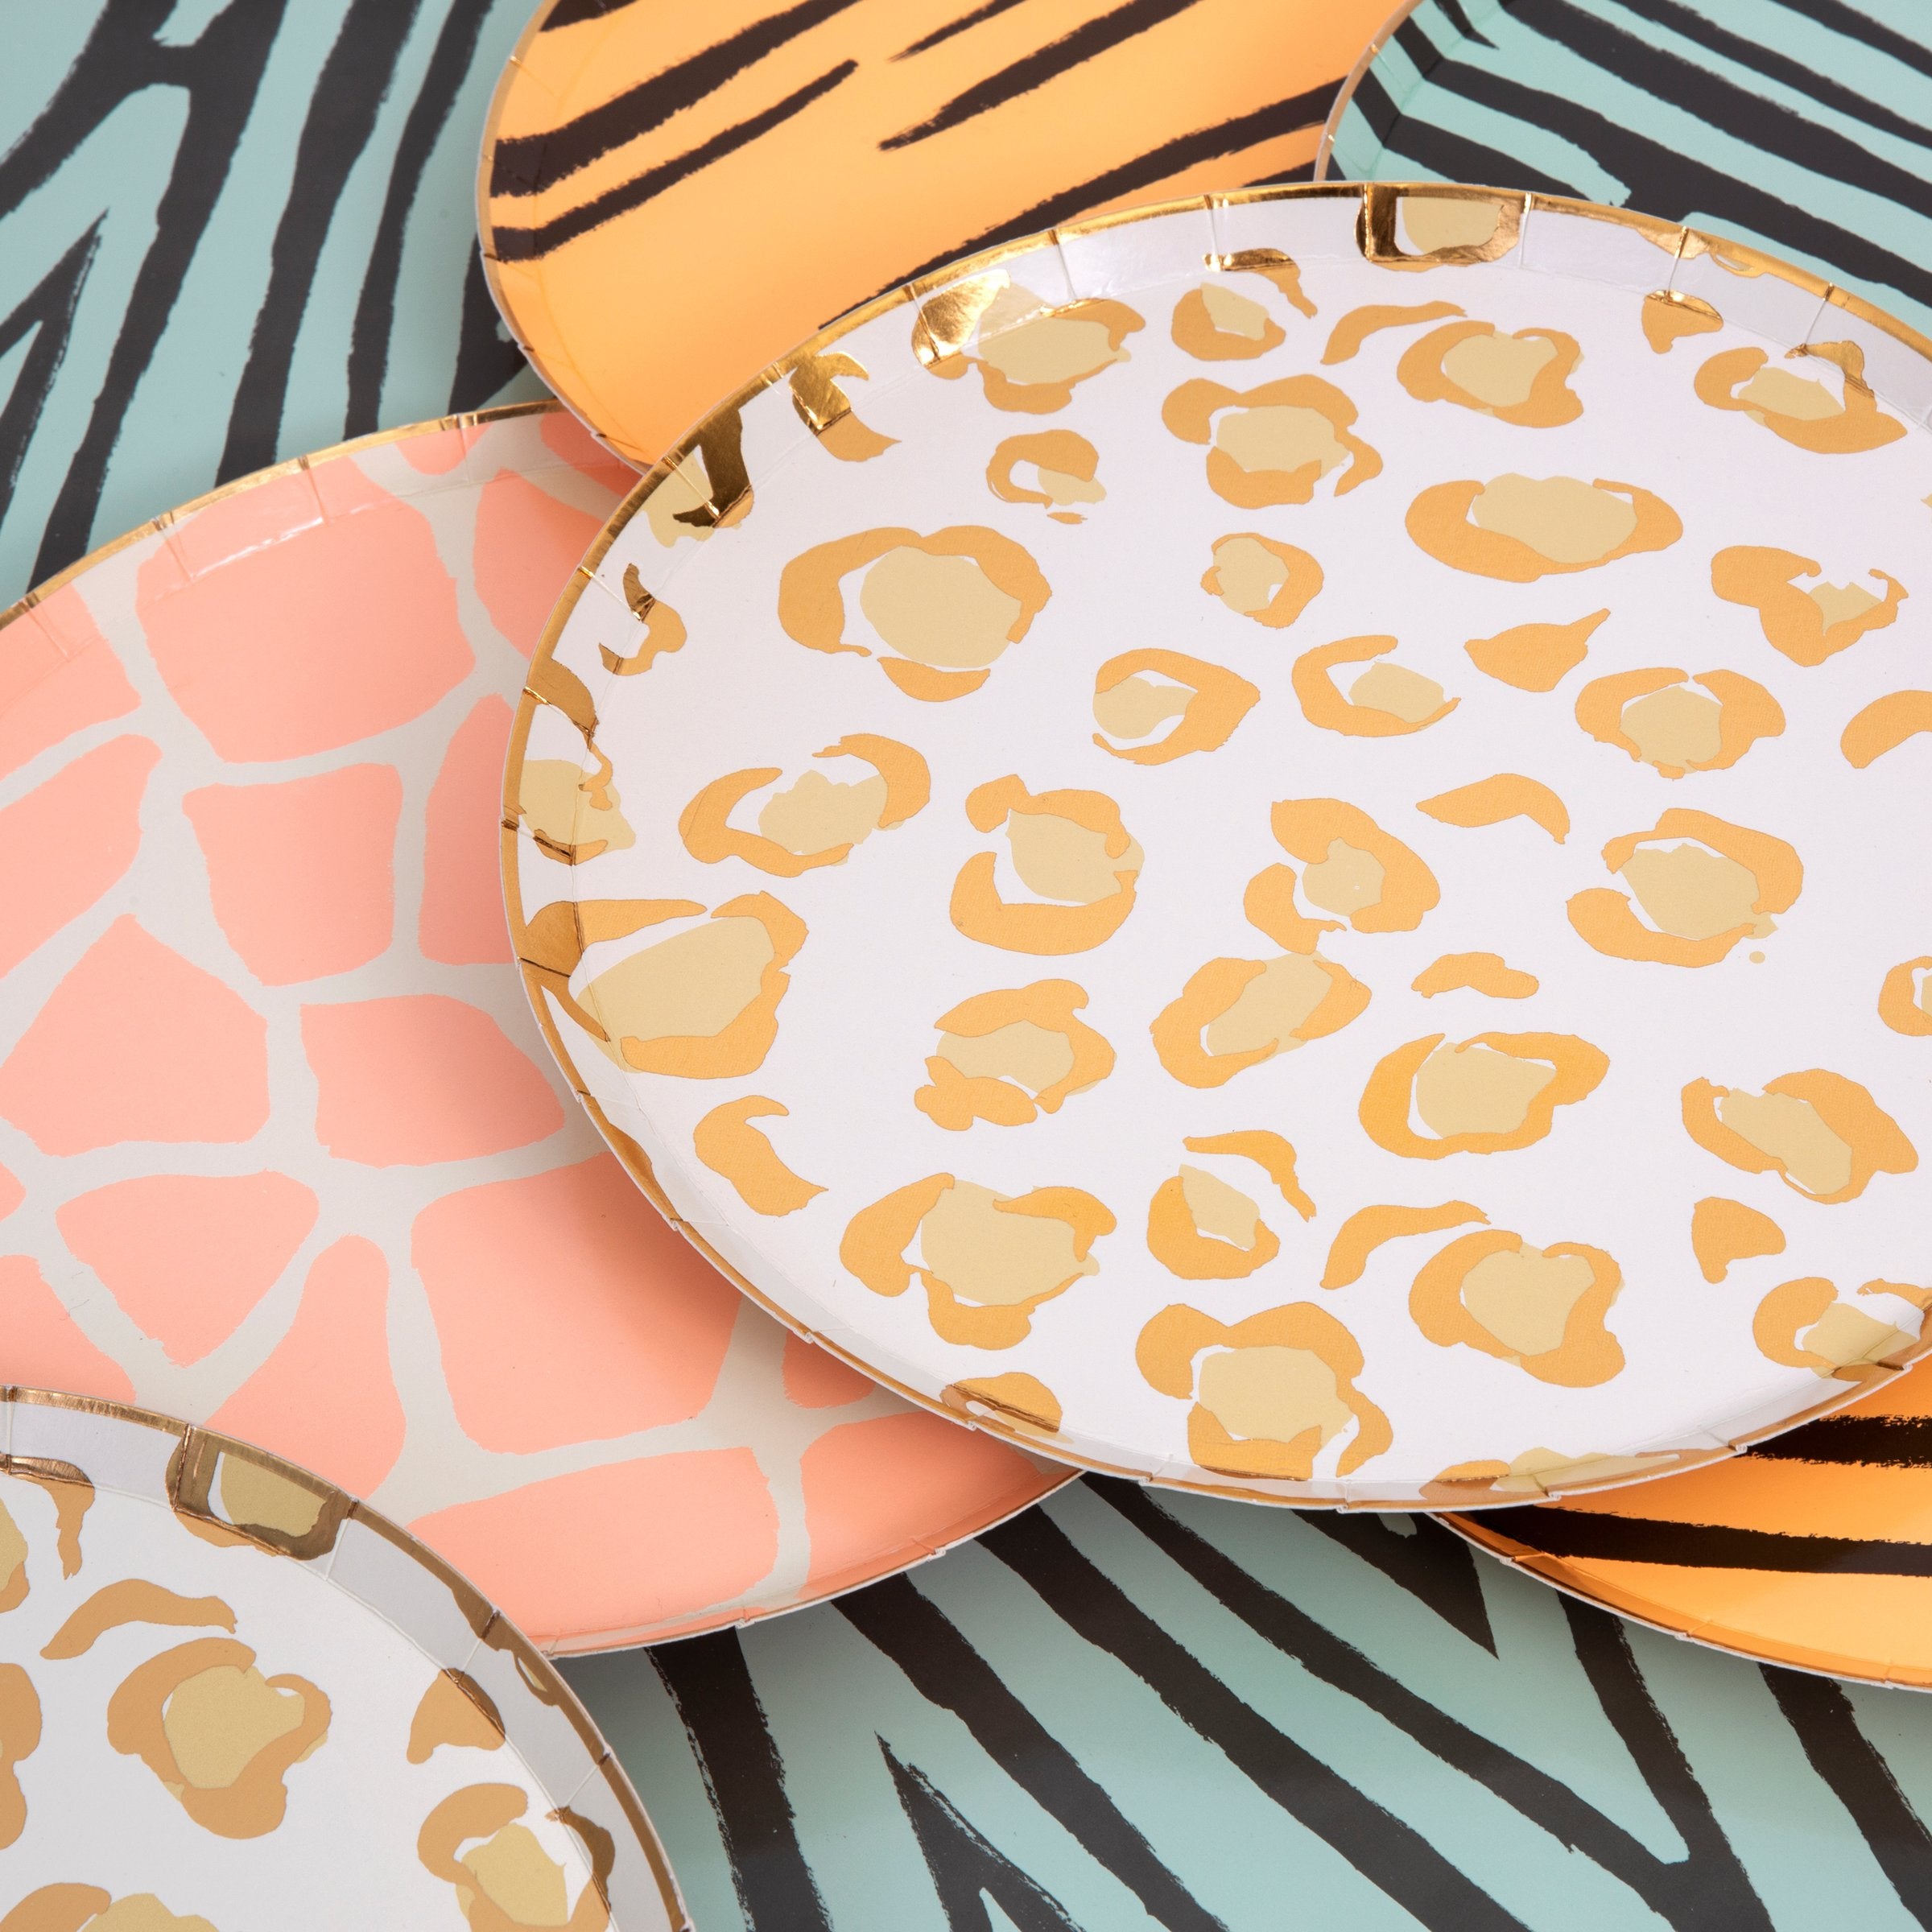 Our animal print side plates are fabulous paper plates for a safari party.